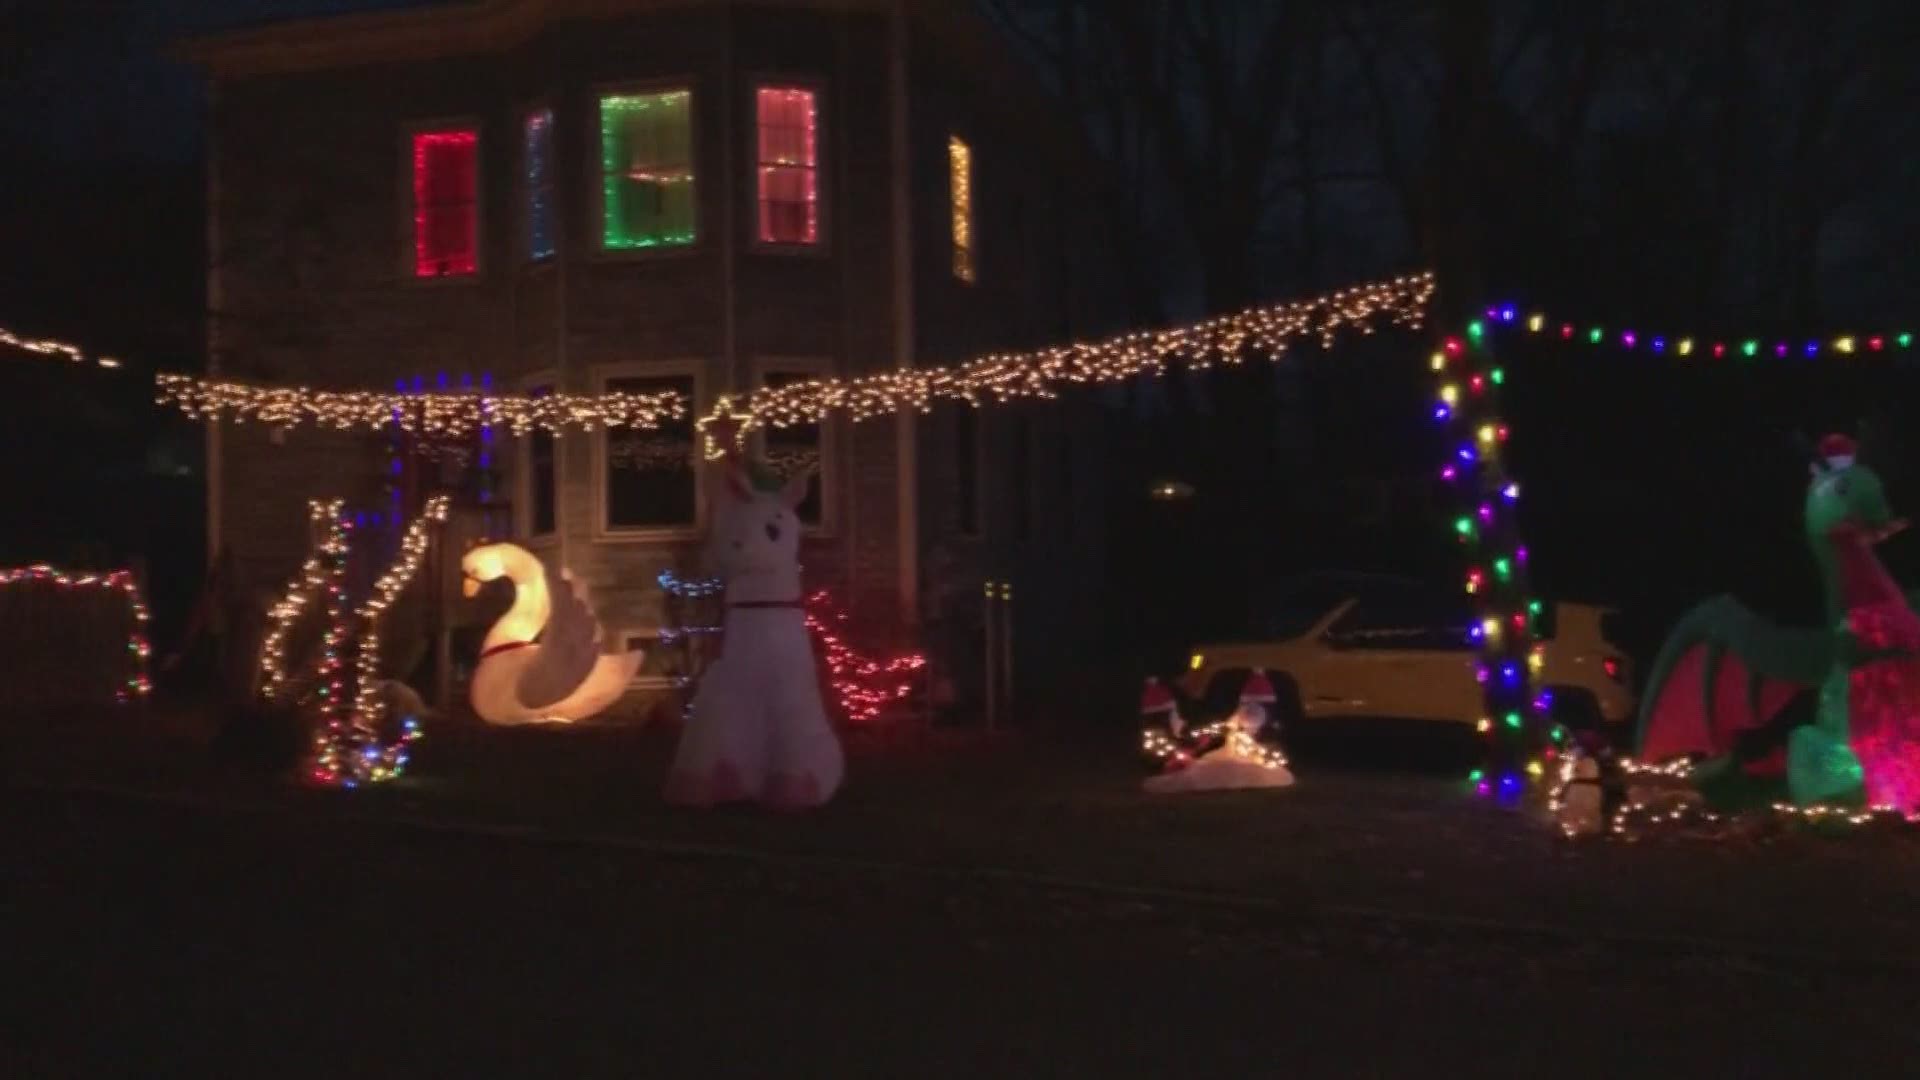 Some Mainers are getting into the spirit early and putting up their holiday light displays.